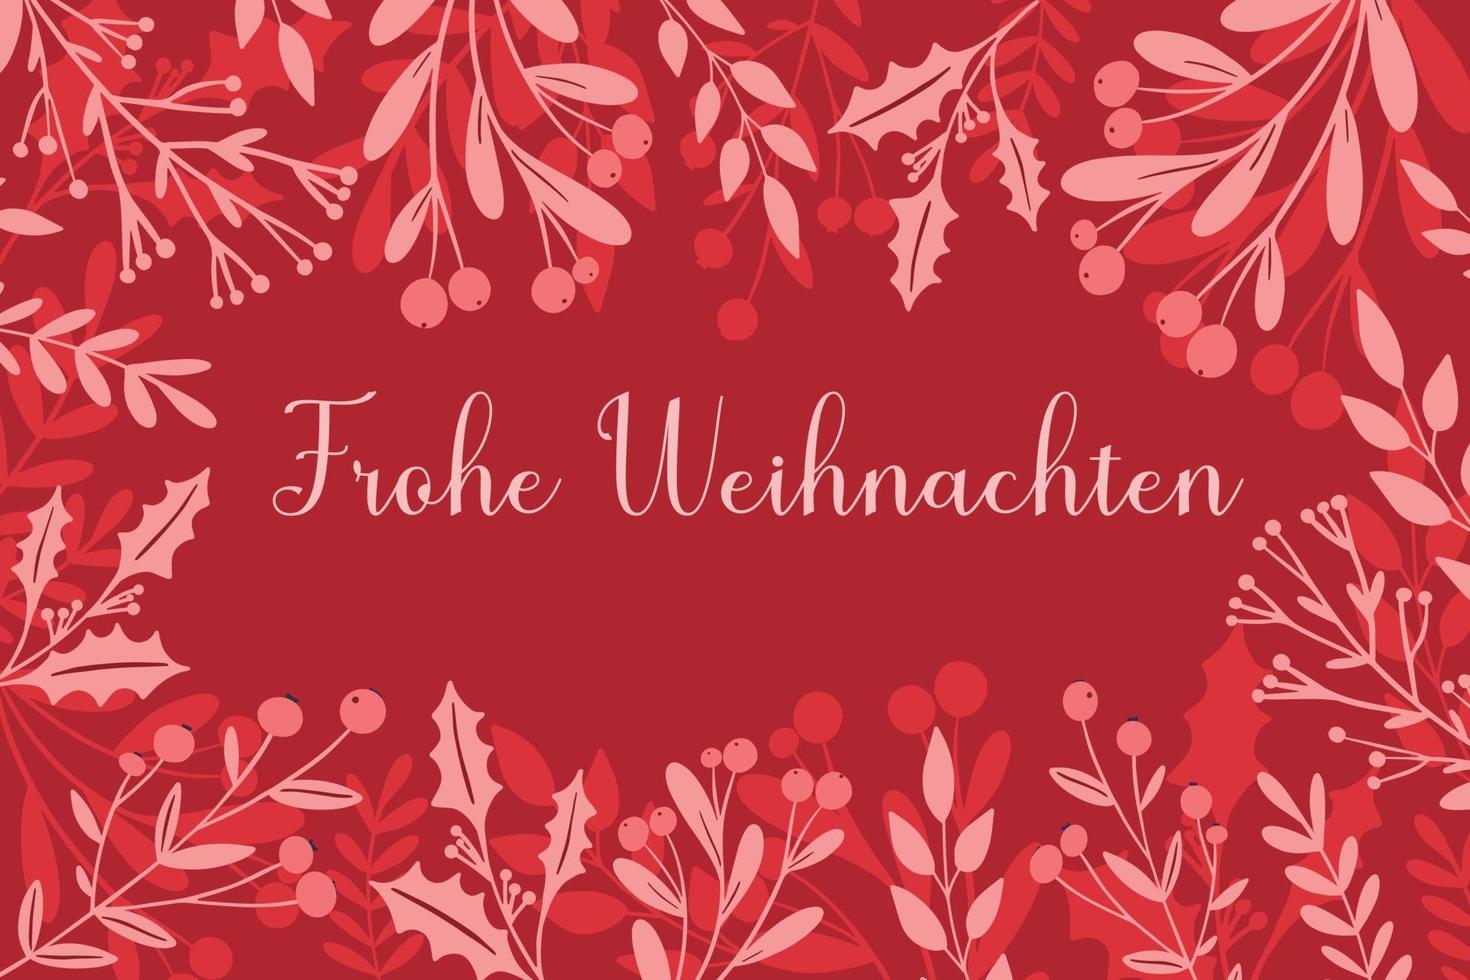 frohe Weihnachten - Merry Christmas in German. Greeting card, template, banner. Winter frame in red, pink holly berry, mistletoe plant, Christmas greenery silhouette vector